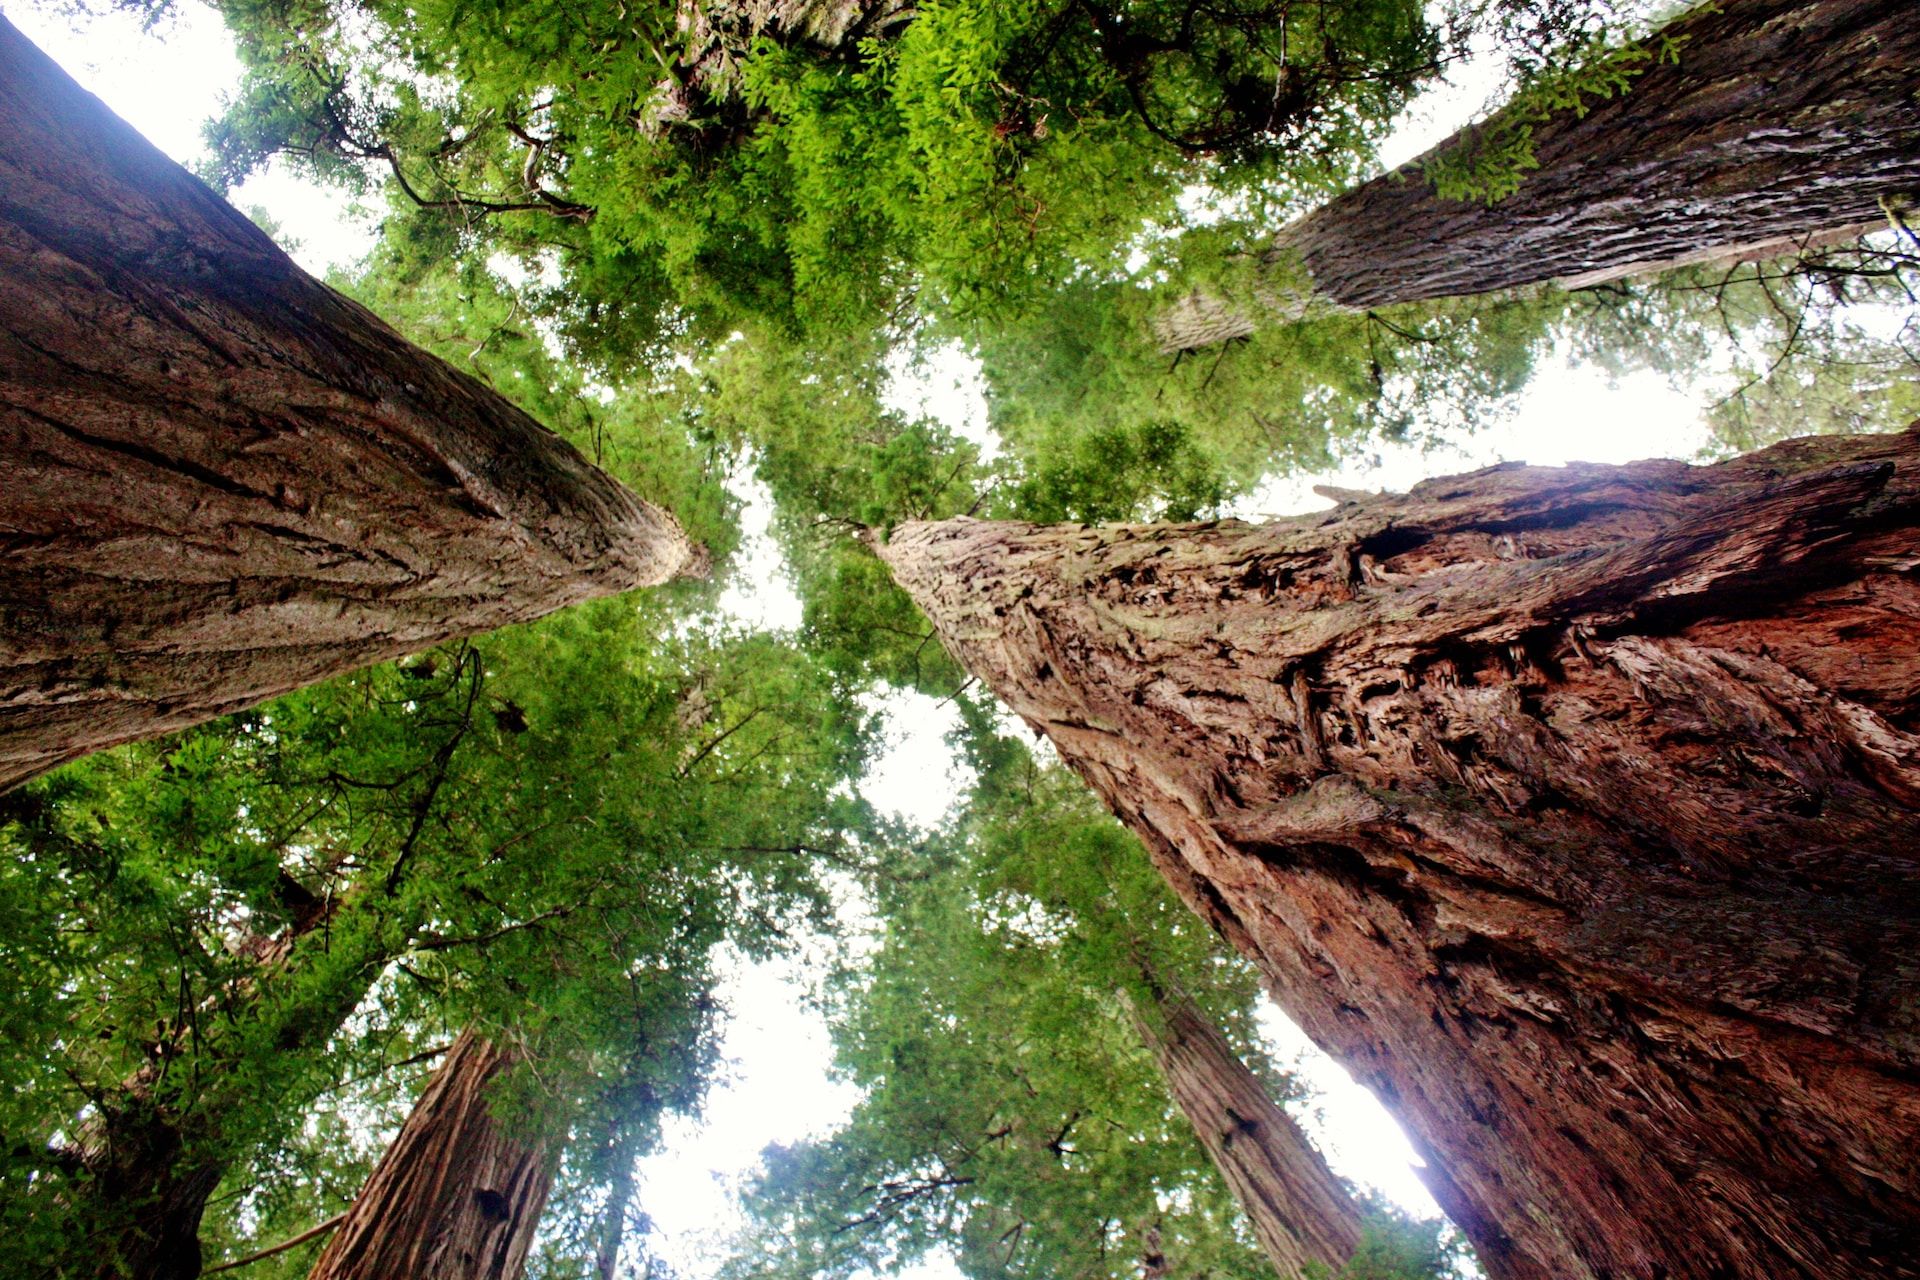 Photo looking up at the endlessly tall Coastal Redwoods